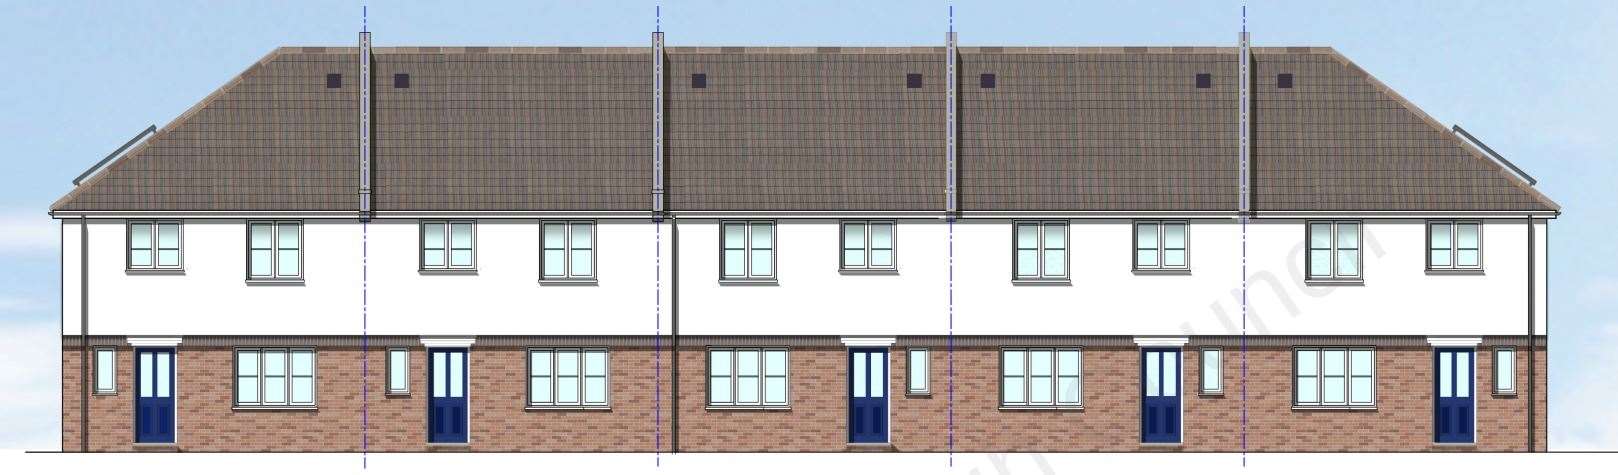 Plans to build five houses have been approved. Picture: GDM Architects